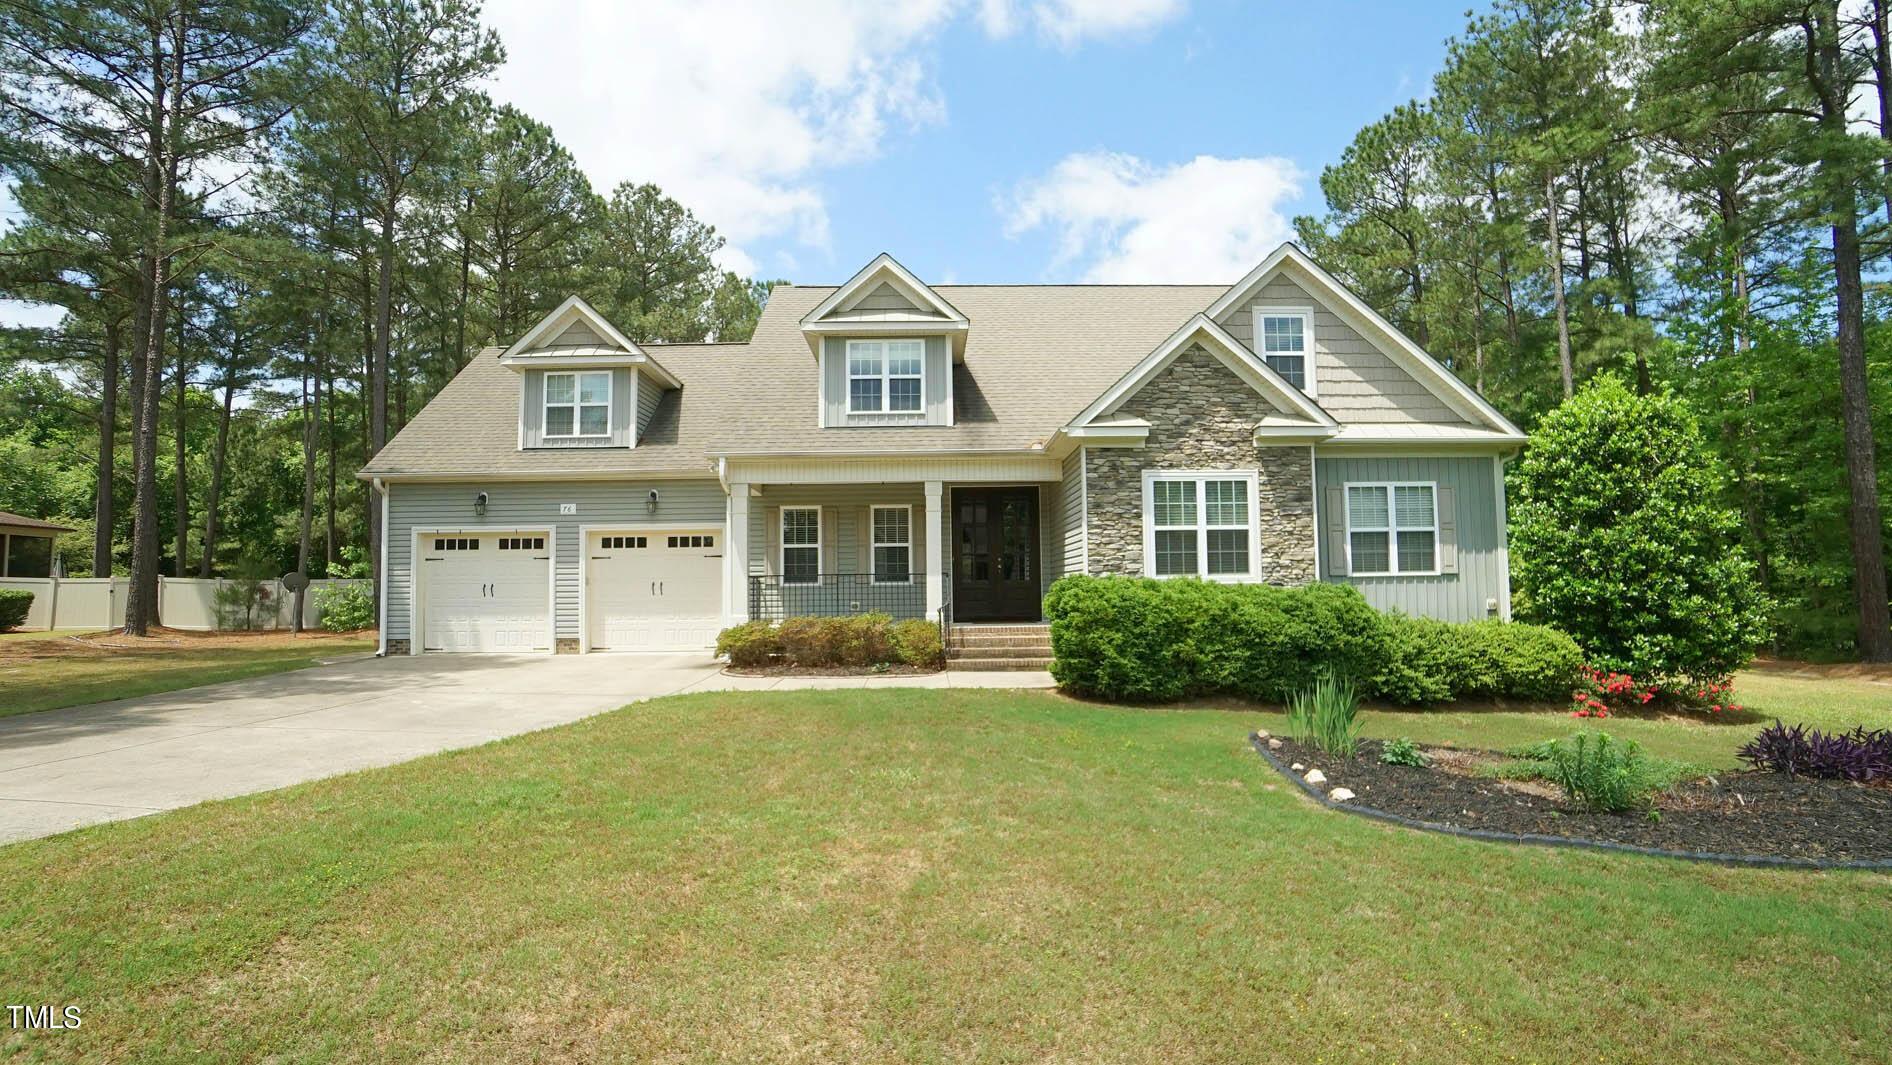 76 Cabernet, 10027906, Clayton, Single Family Residence,  for sale, Realty World - Triangle Living